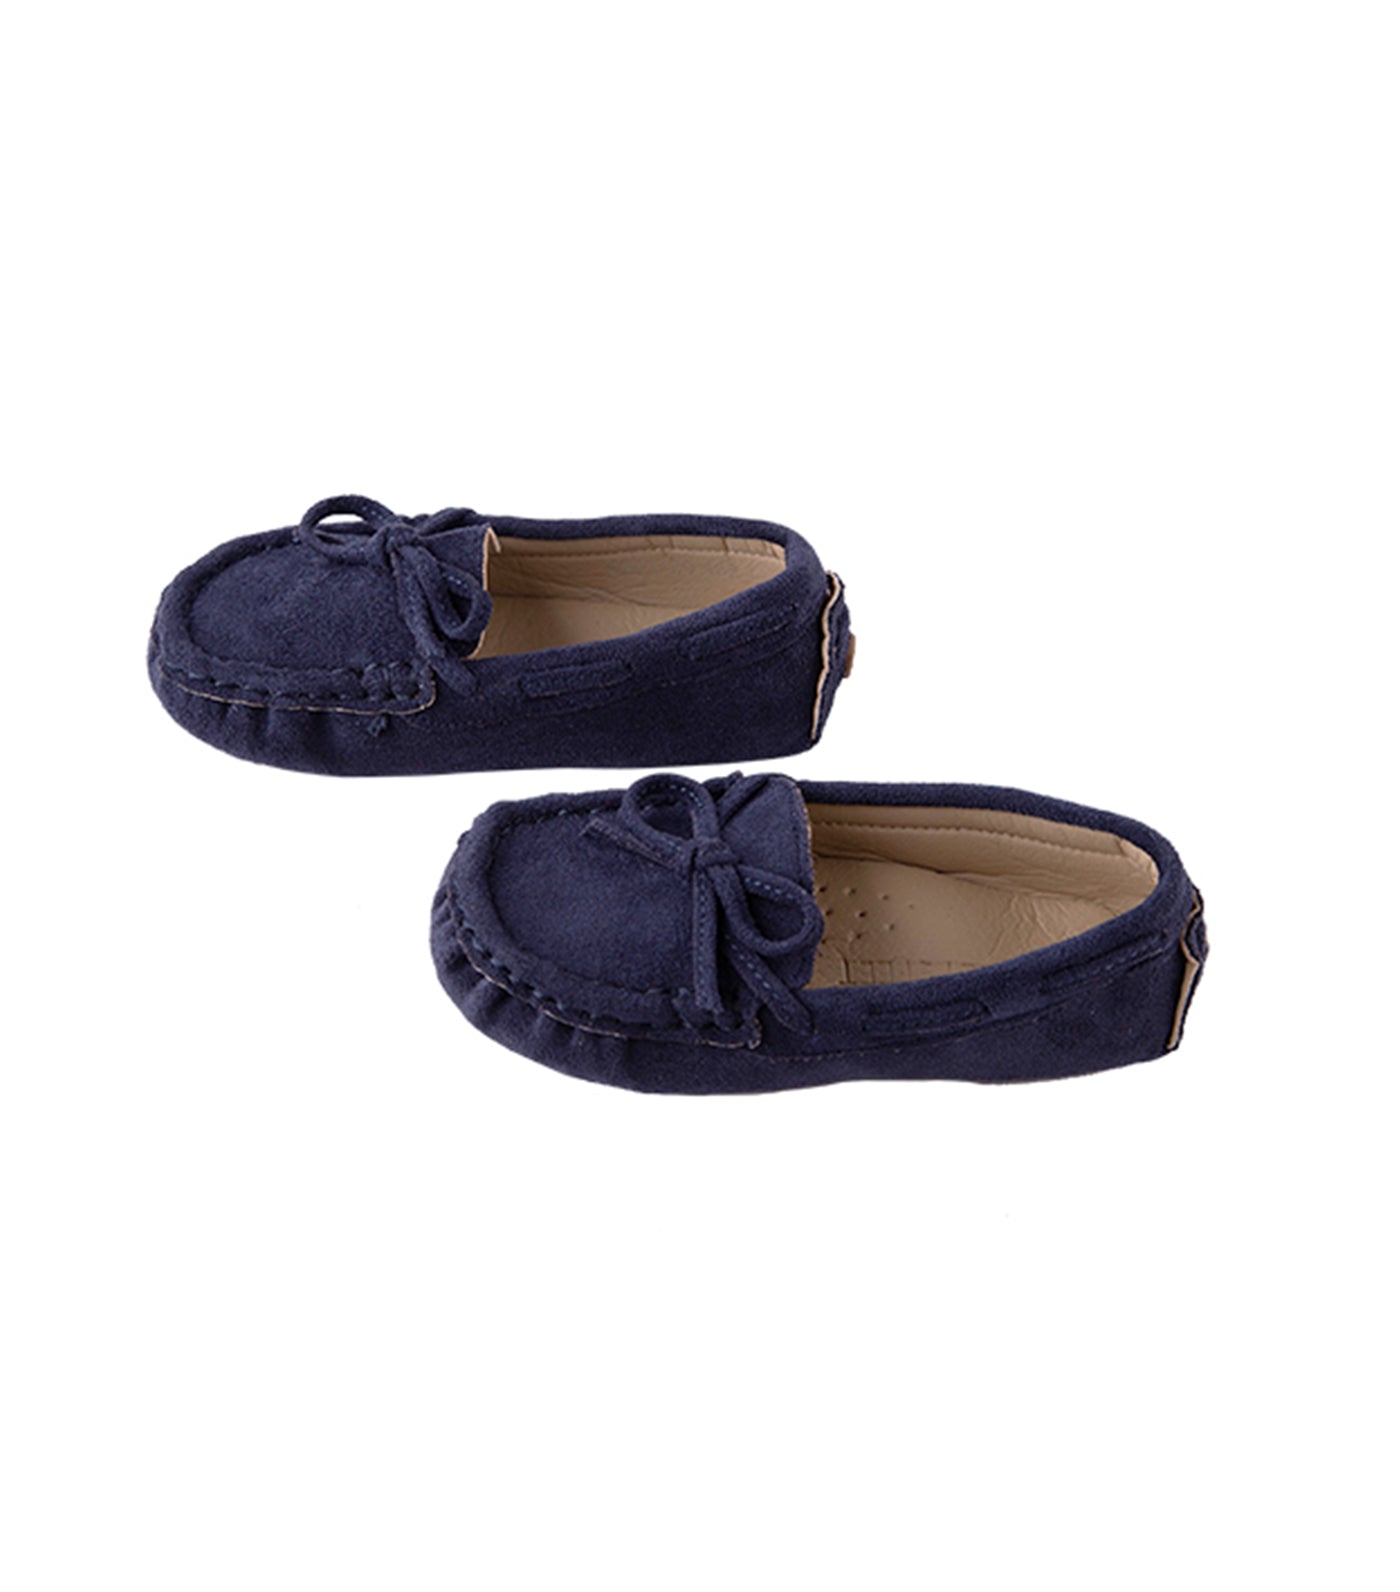 Seal Kids Loafers for Boys - Navy Blue